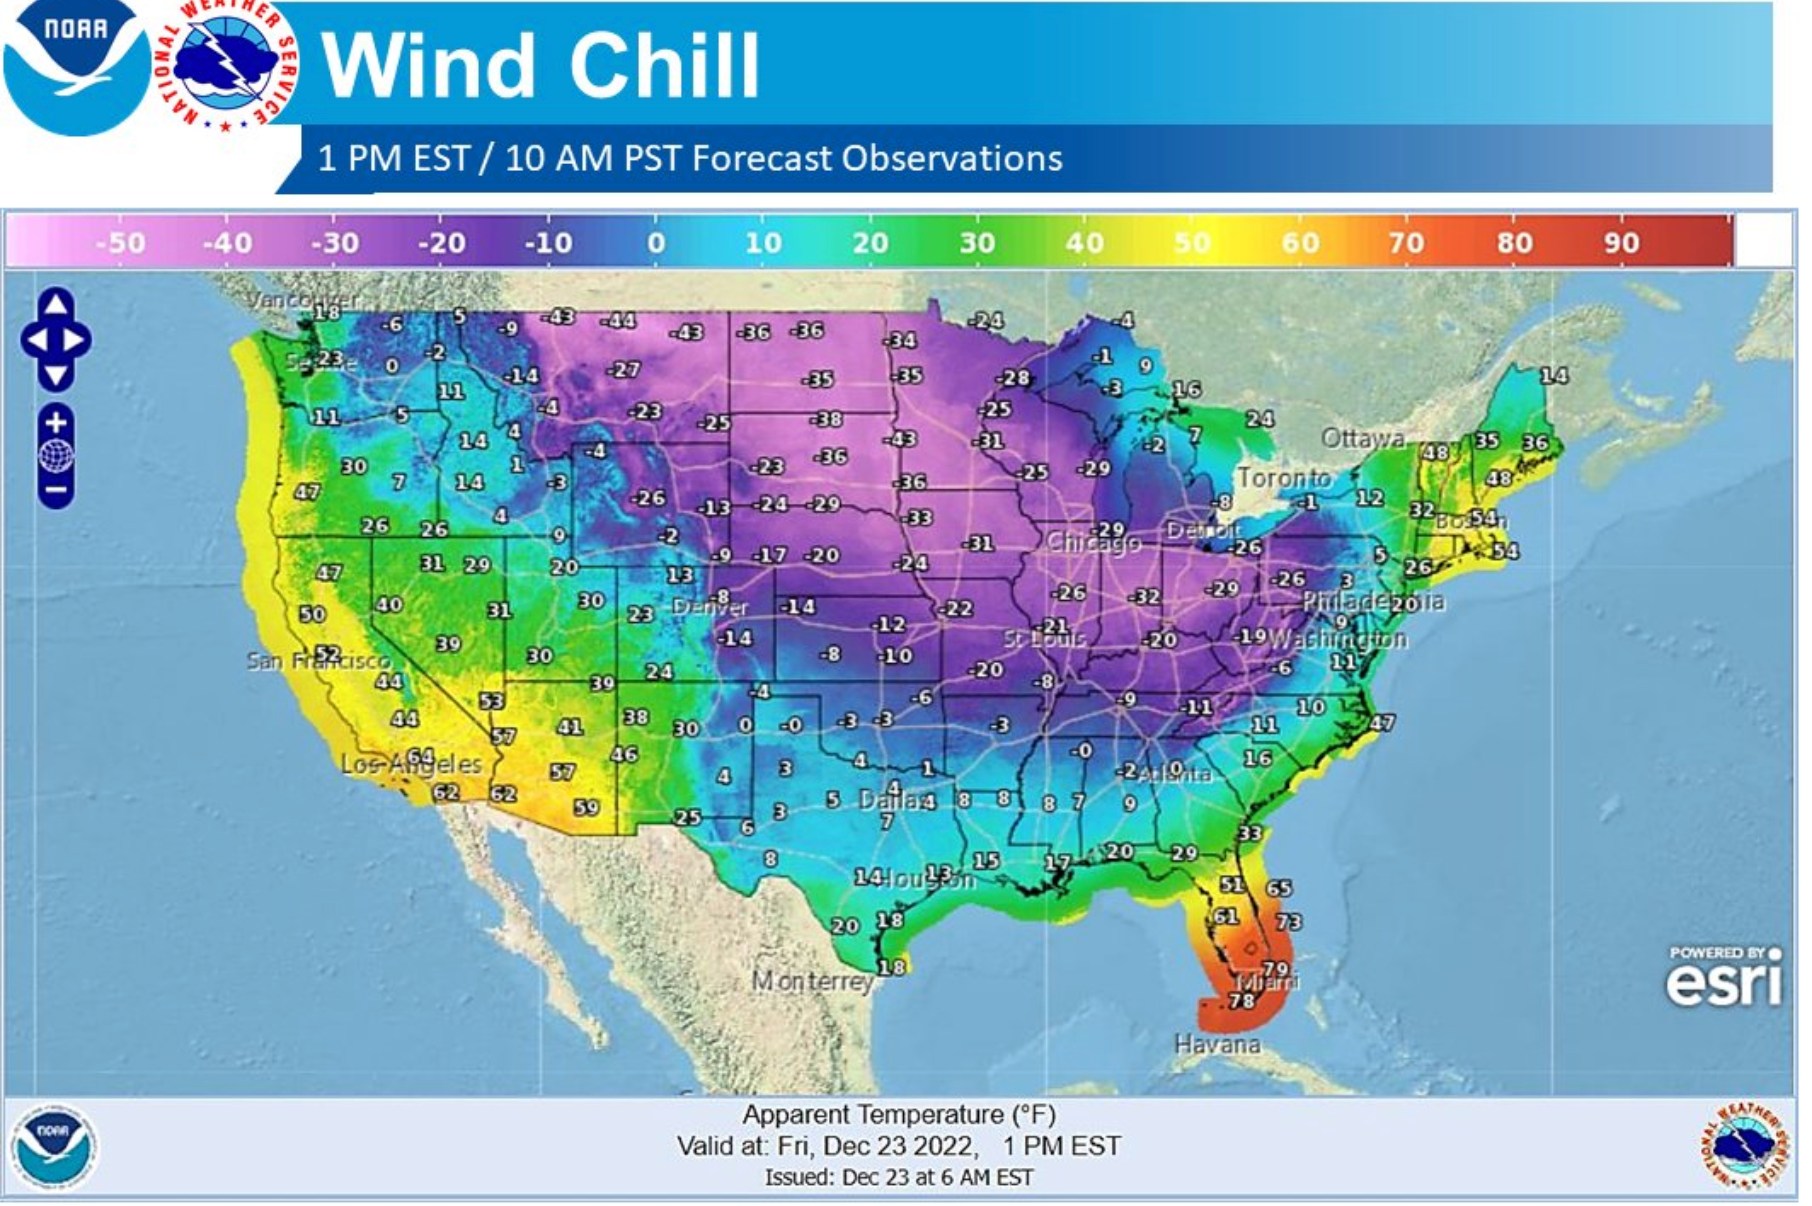 Temperatures plummeted across much of the US driven by wind chill on Friday